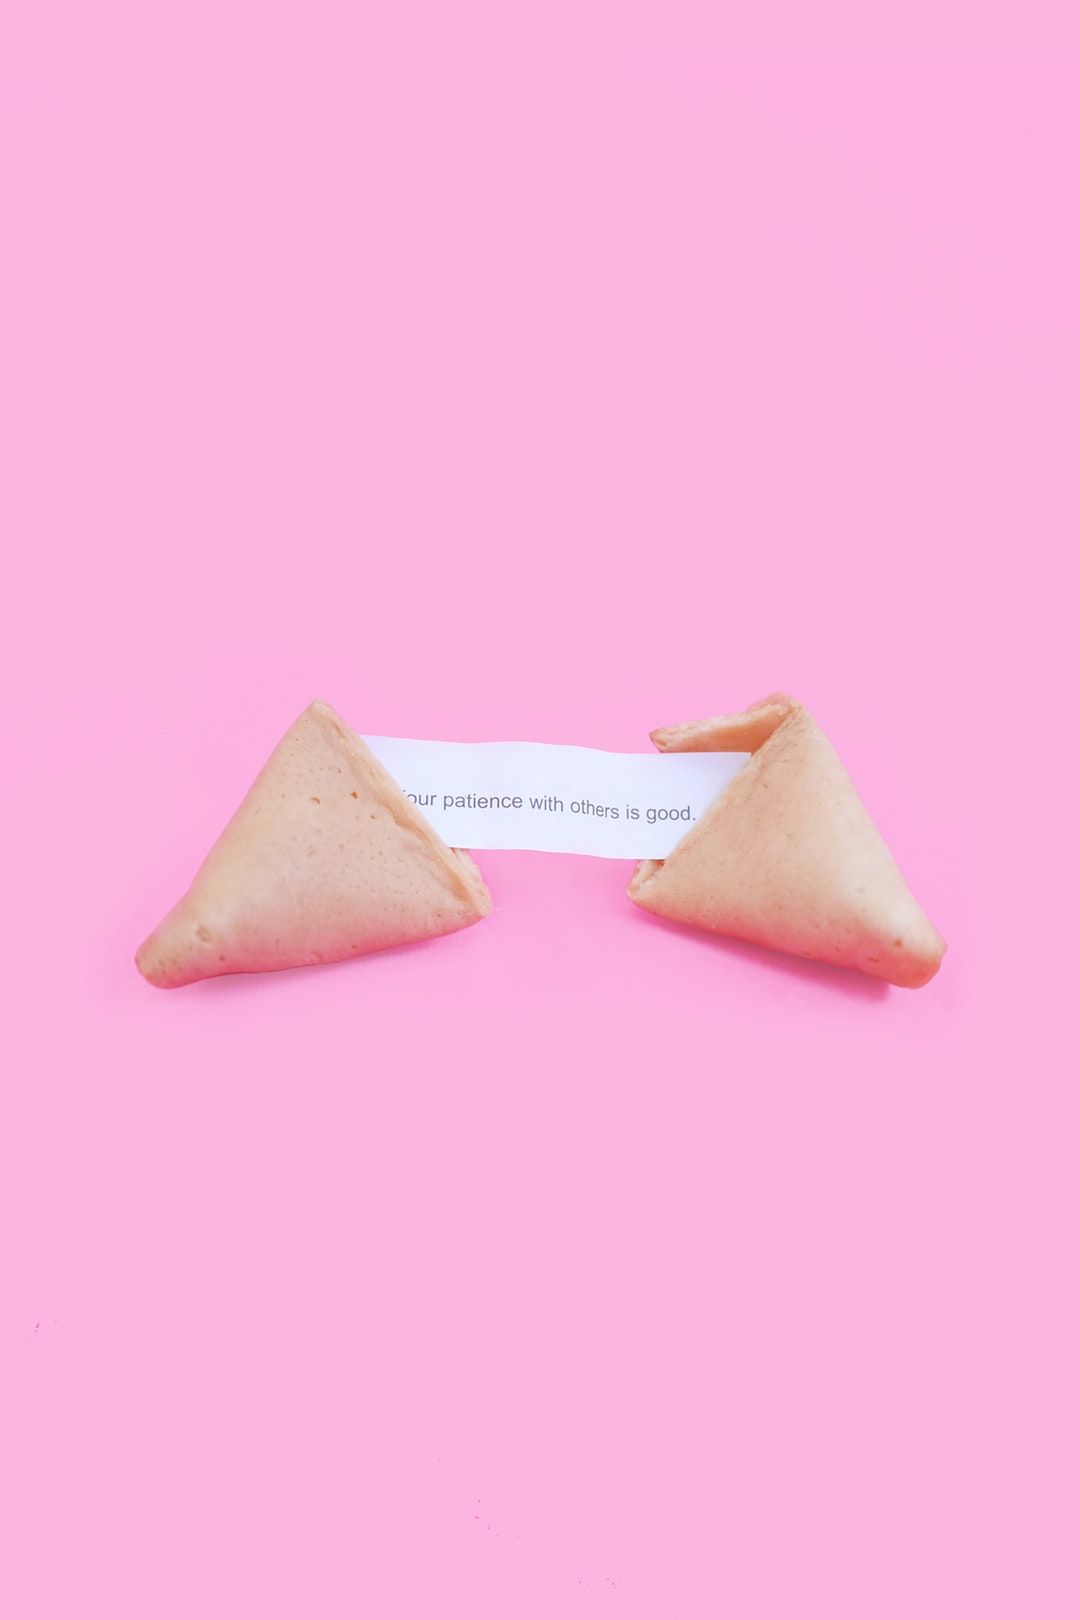 fortune cookie with Patience with others is good message